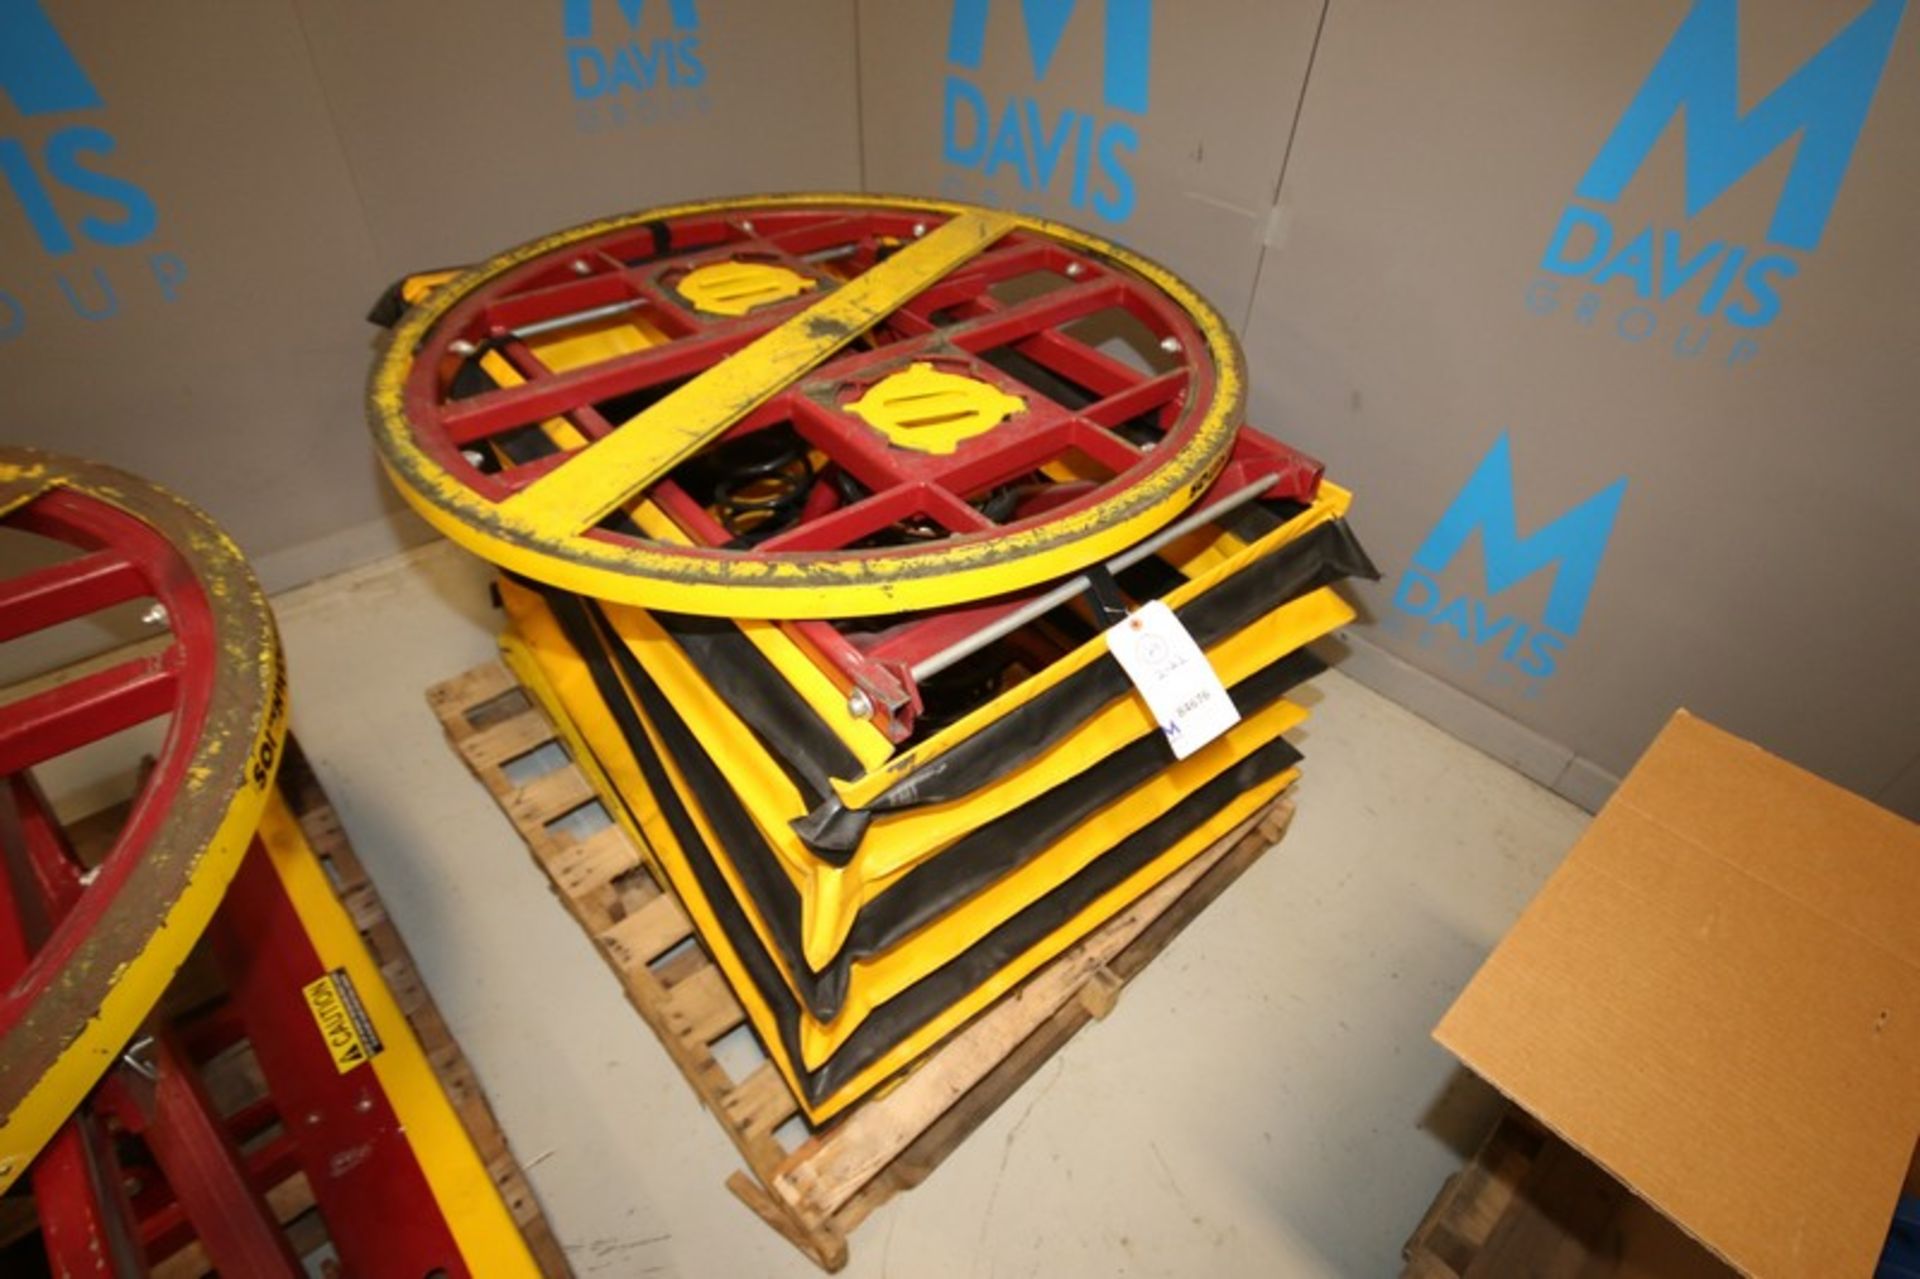 Southworth 44" Pallet Positioner, Model 4ZC16(INV#84676)(Located @ the MDG Auction Showroom in Pgh.,